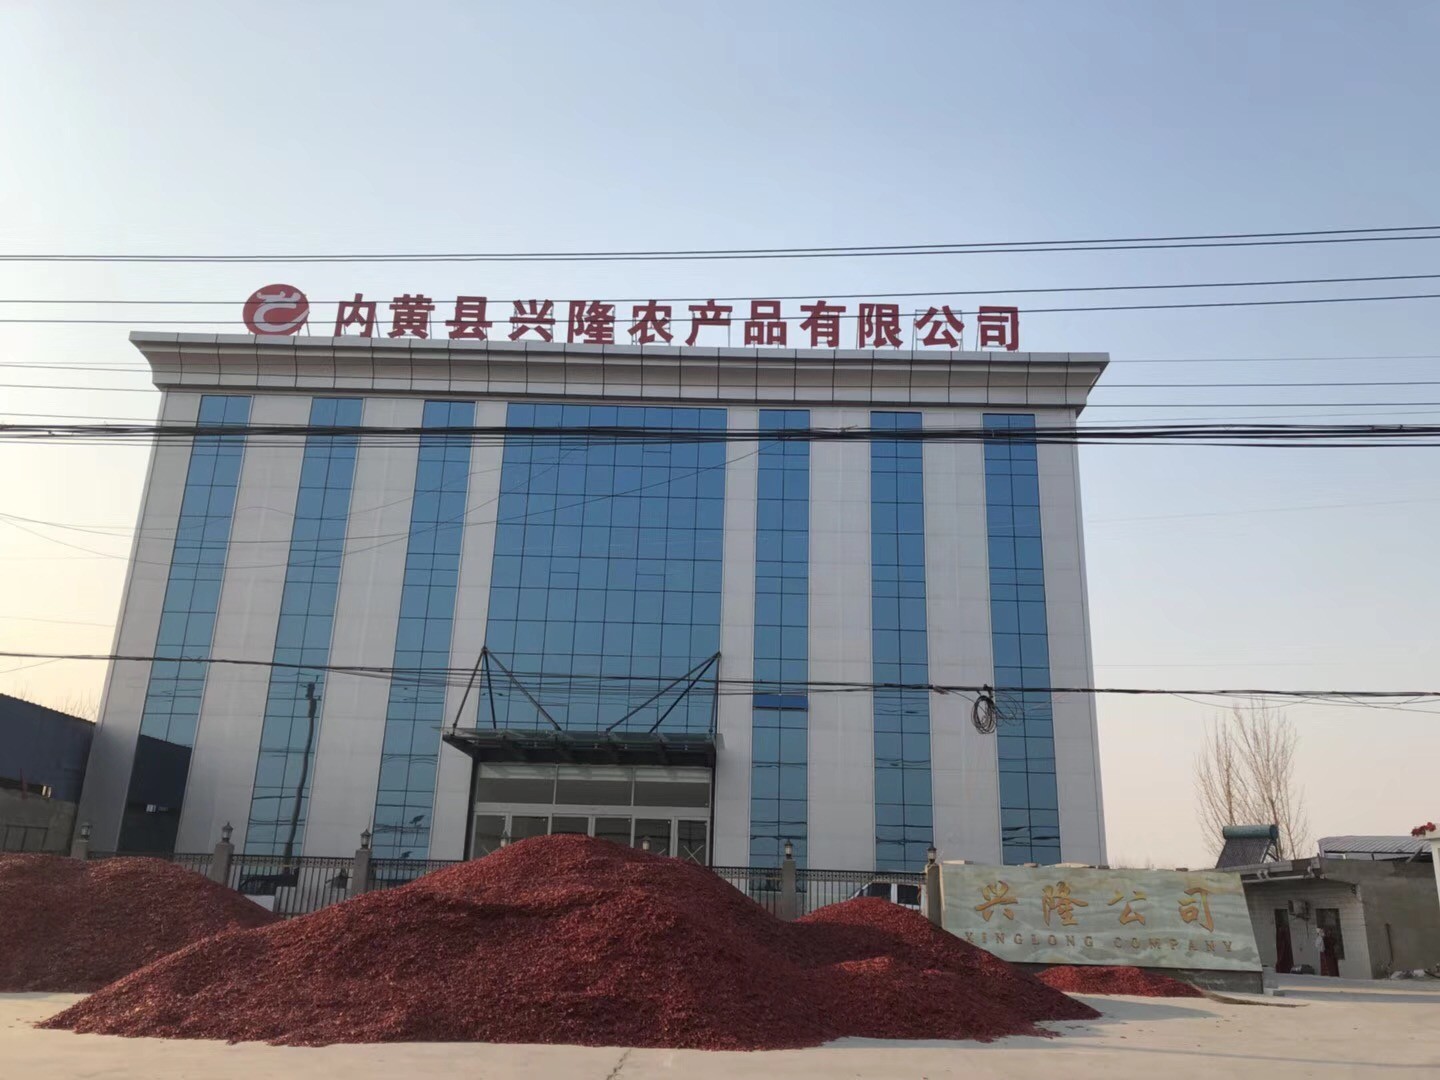 Cina Neihuang Xinglong Agricultural Products Co. Ltd